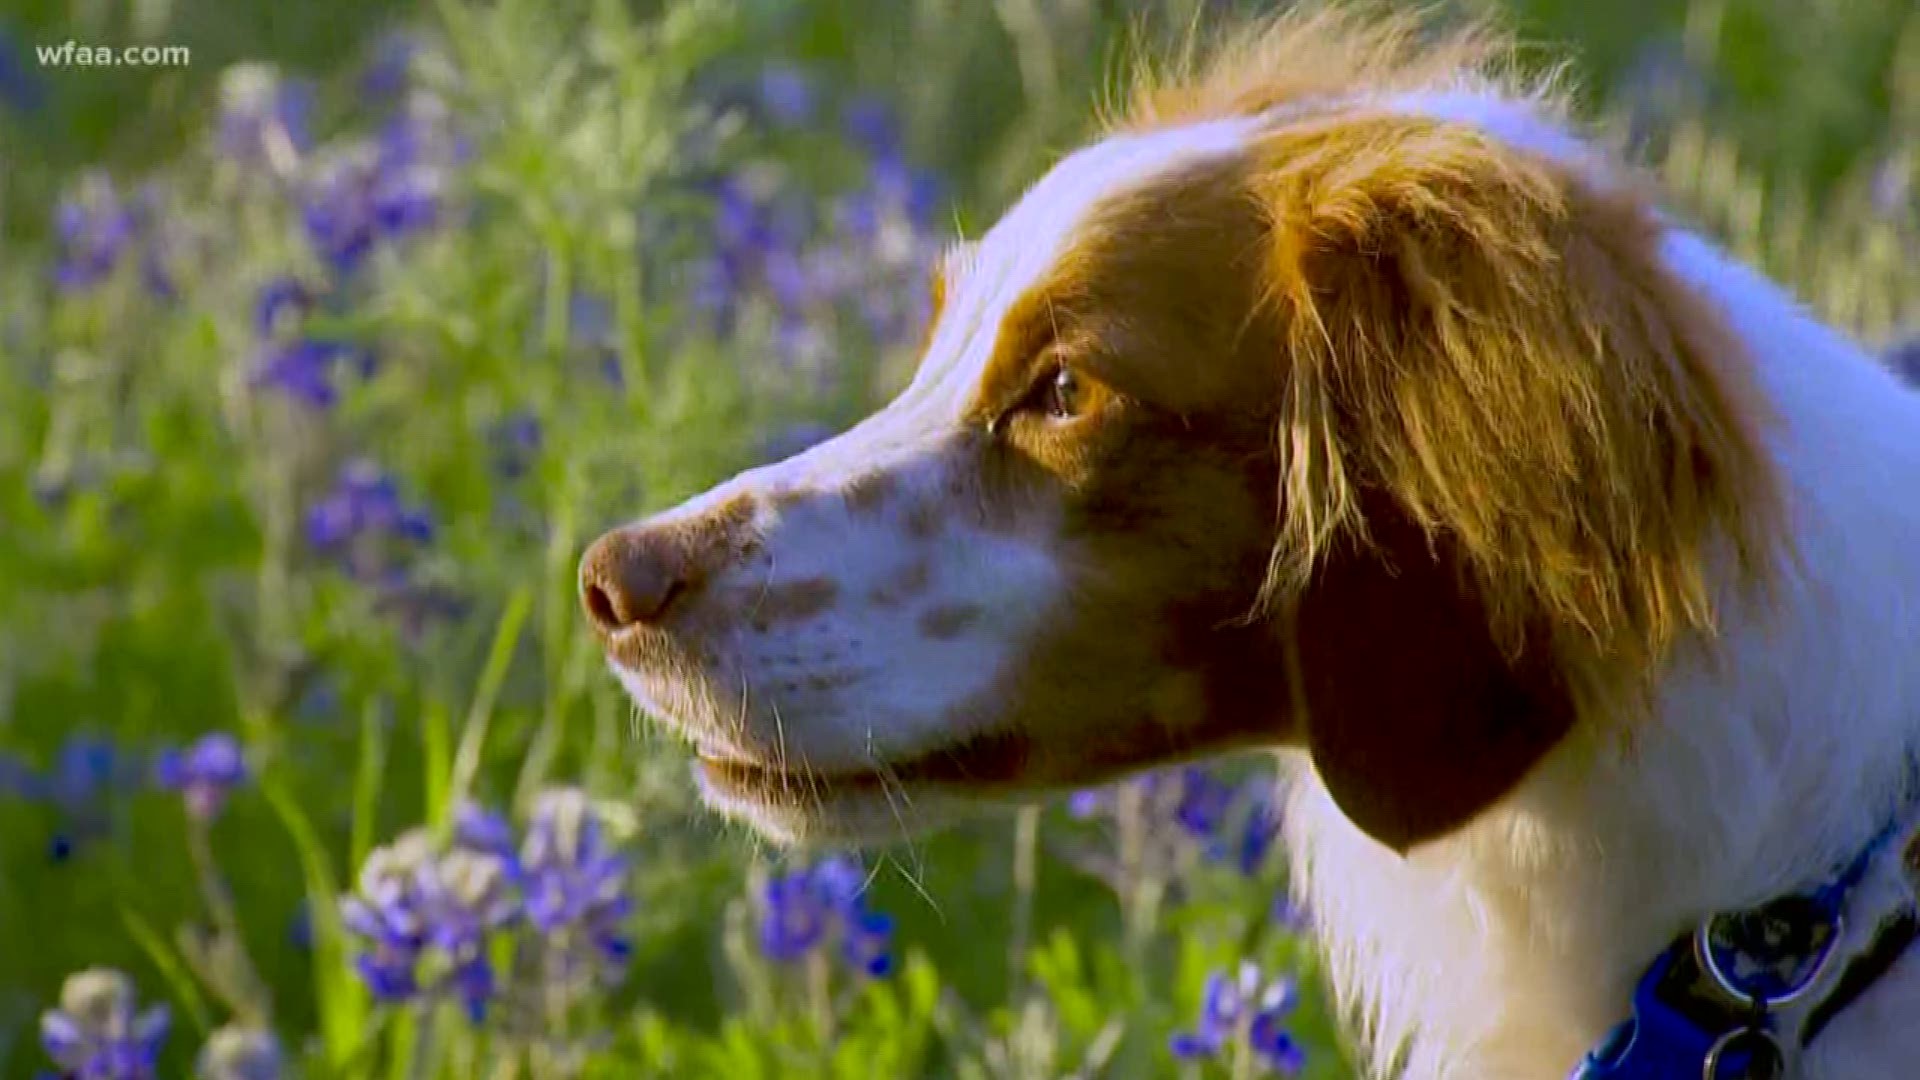 It's definitely a Texas thing!  WFAA spends a day with photographer Jenna Regan and she snaps the perfect shot of man's best friend in the beautiful bluebonnets!